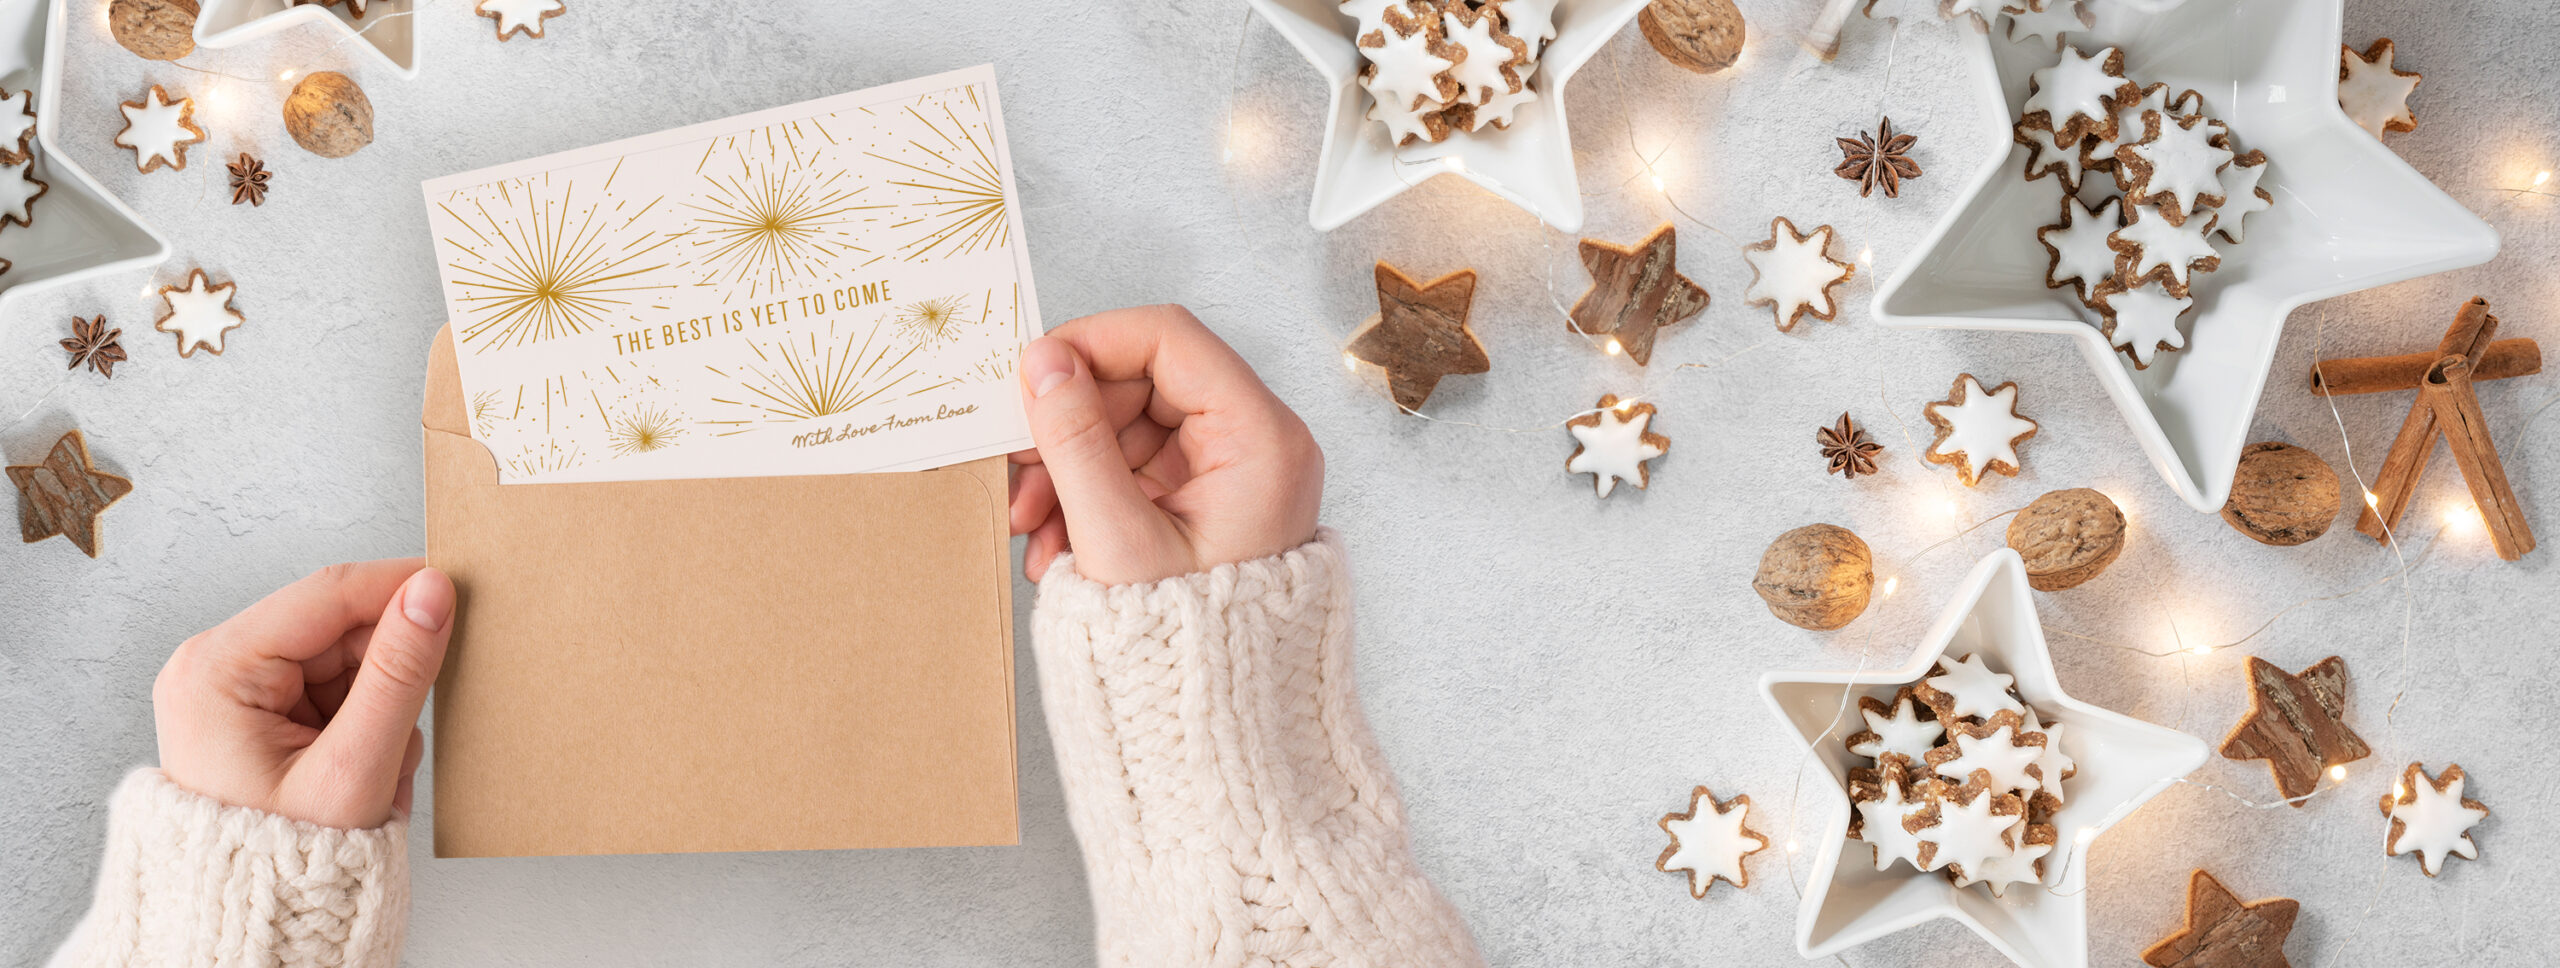 https://www.avery.com/blog/wp-content/uploads/2023/09/902824_2023-09-Editorial-How-to-Create-Stunning-Last-Minute-Holiday-Cards-REFRESH_Article-Banner_3000x1134-scaled.jpg